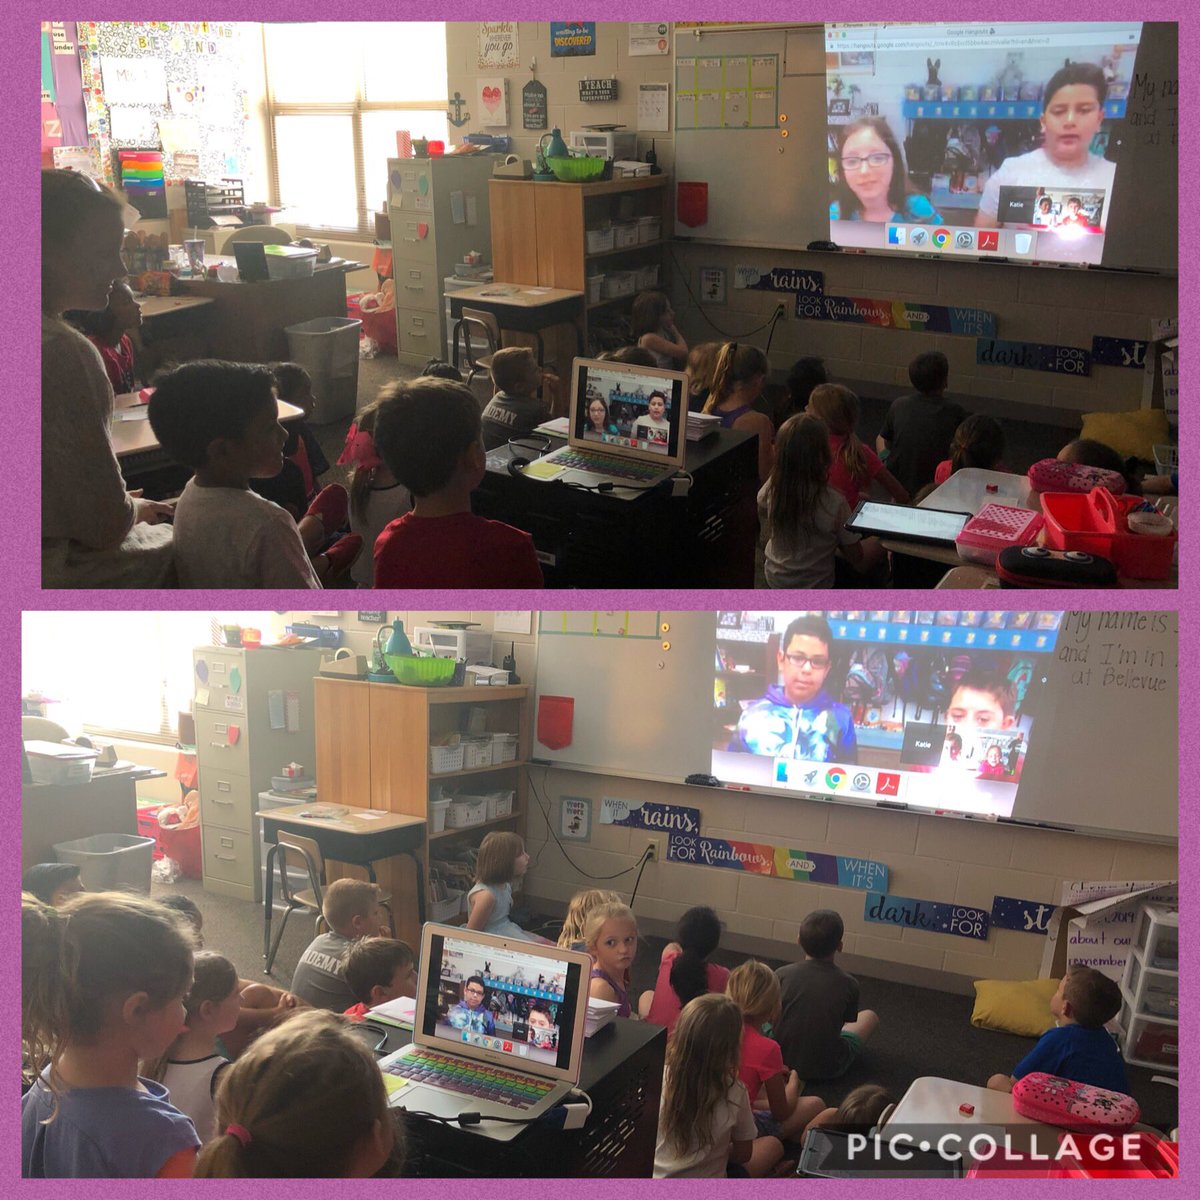 After a exchanging friendly letters with @herbertkatie 4th grade at @LLawrenceElem @DickmanMckynzie 1st graders @BVHawksBPS  did a google hangout to meet our new buddies. It’s fun having buddies at another @BellevueSchools #bpsne #teambps #authenticwriting